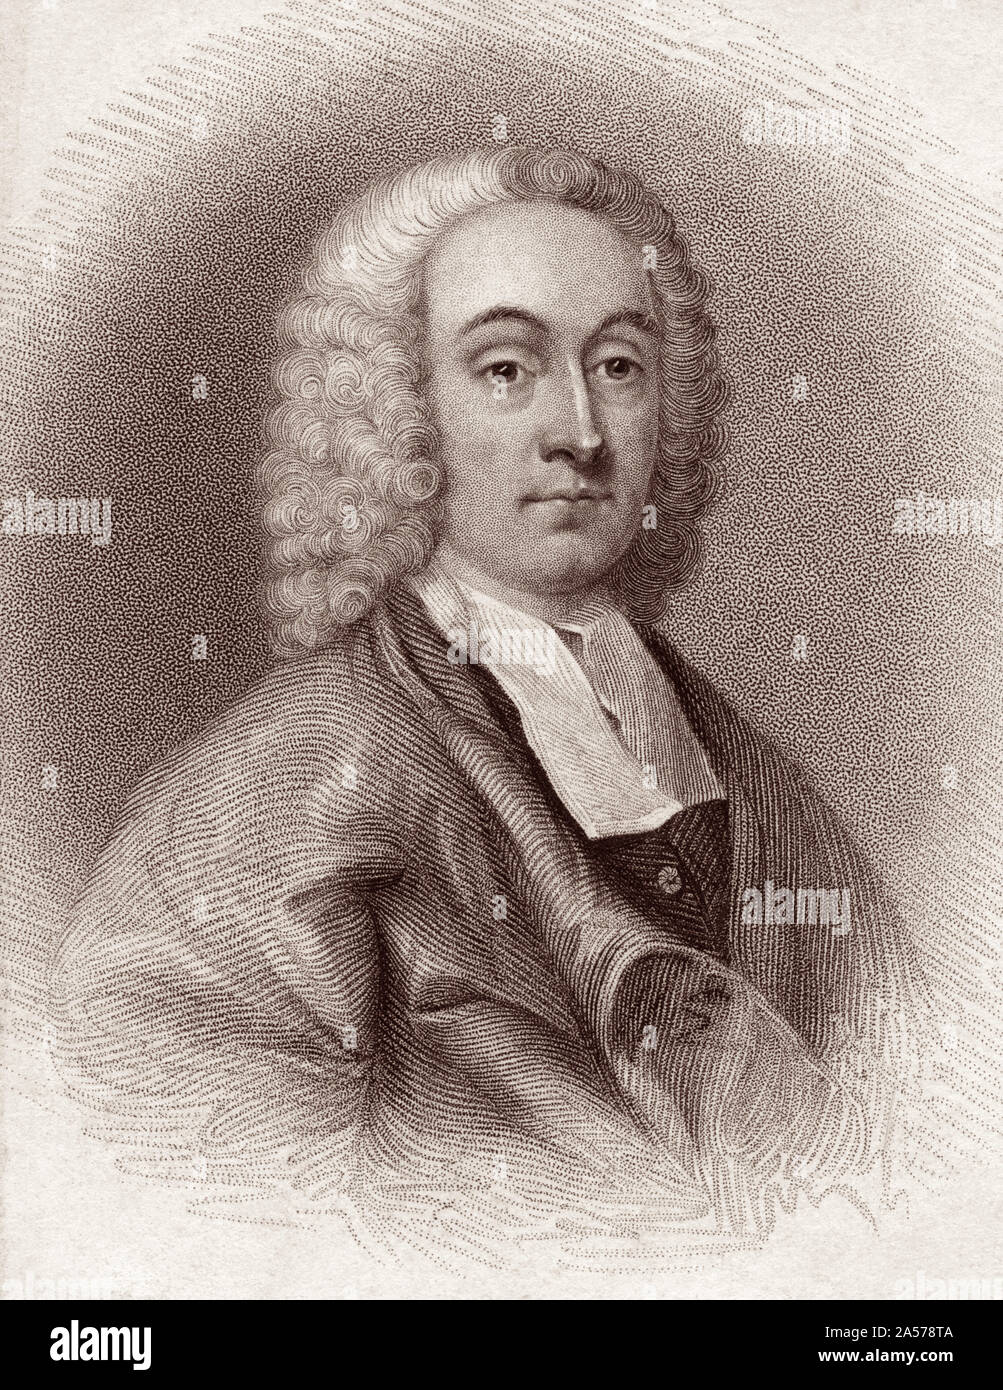 Philip Doddridge D.D. (1702–1751) was an evangelical English Nonconformist (Congregationalist) minister, educator, and prolific hymnwriter. Doddridge was a contemporary and friend of Isaac Watts, John Wesley and George Whitefield, and was an influence through his writing on William Wilberforce and Charles Spurgeon. Stock Photo